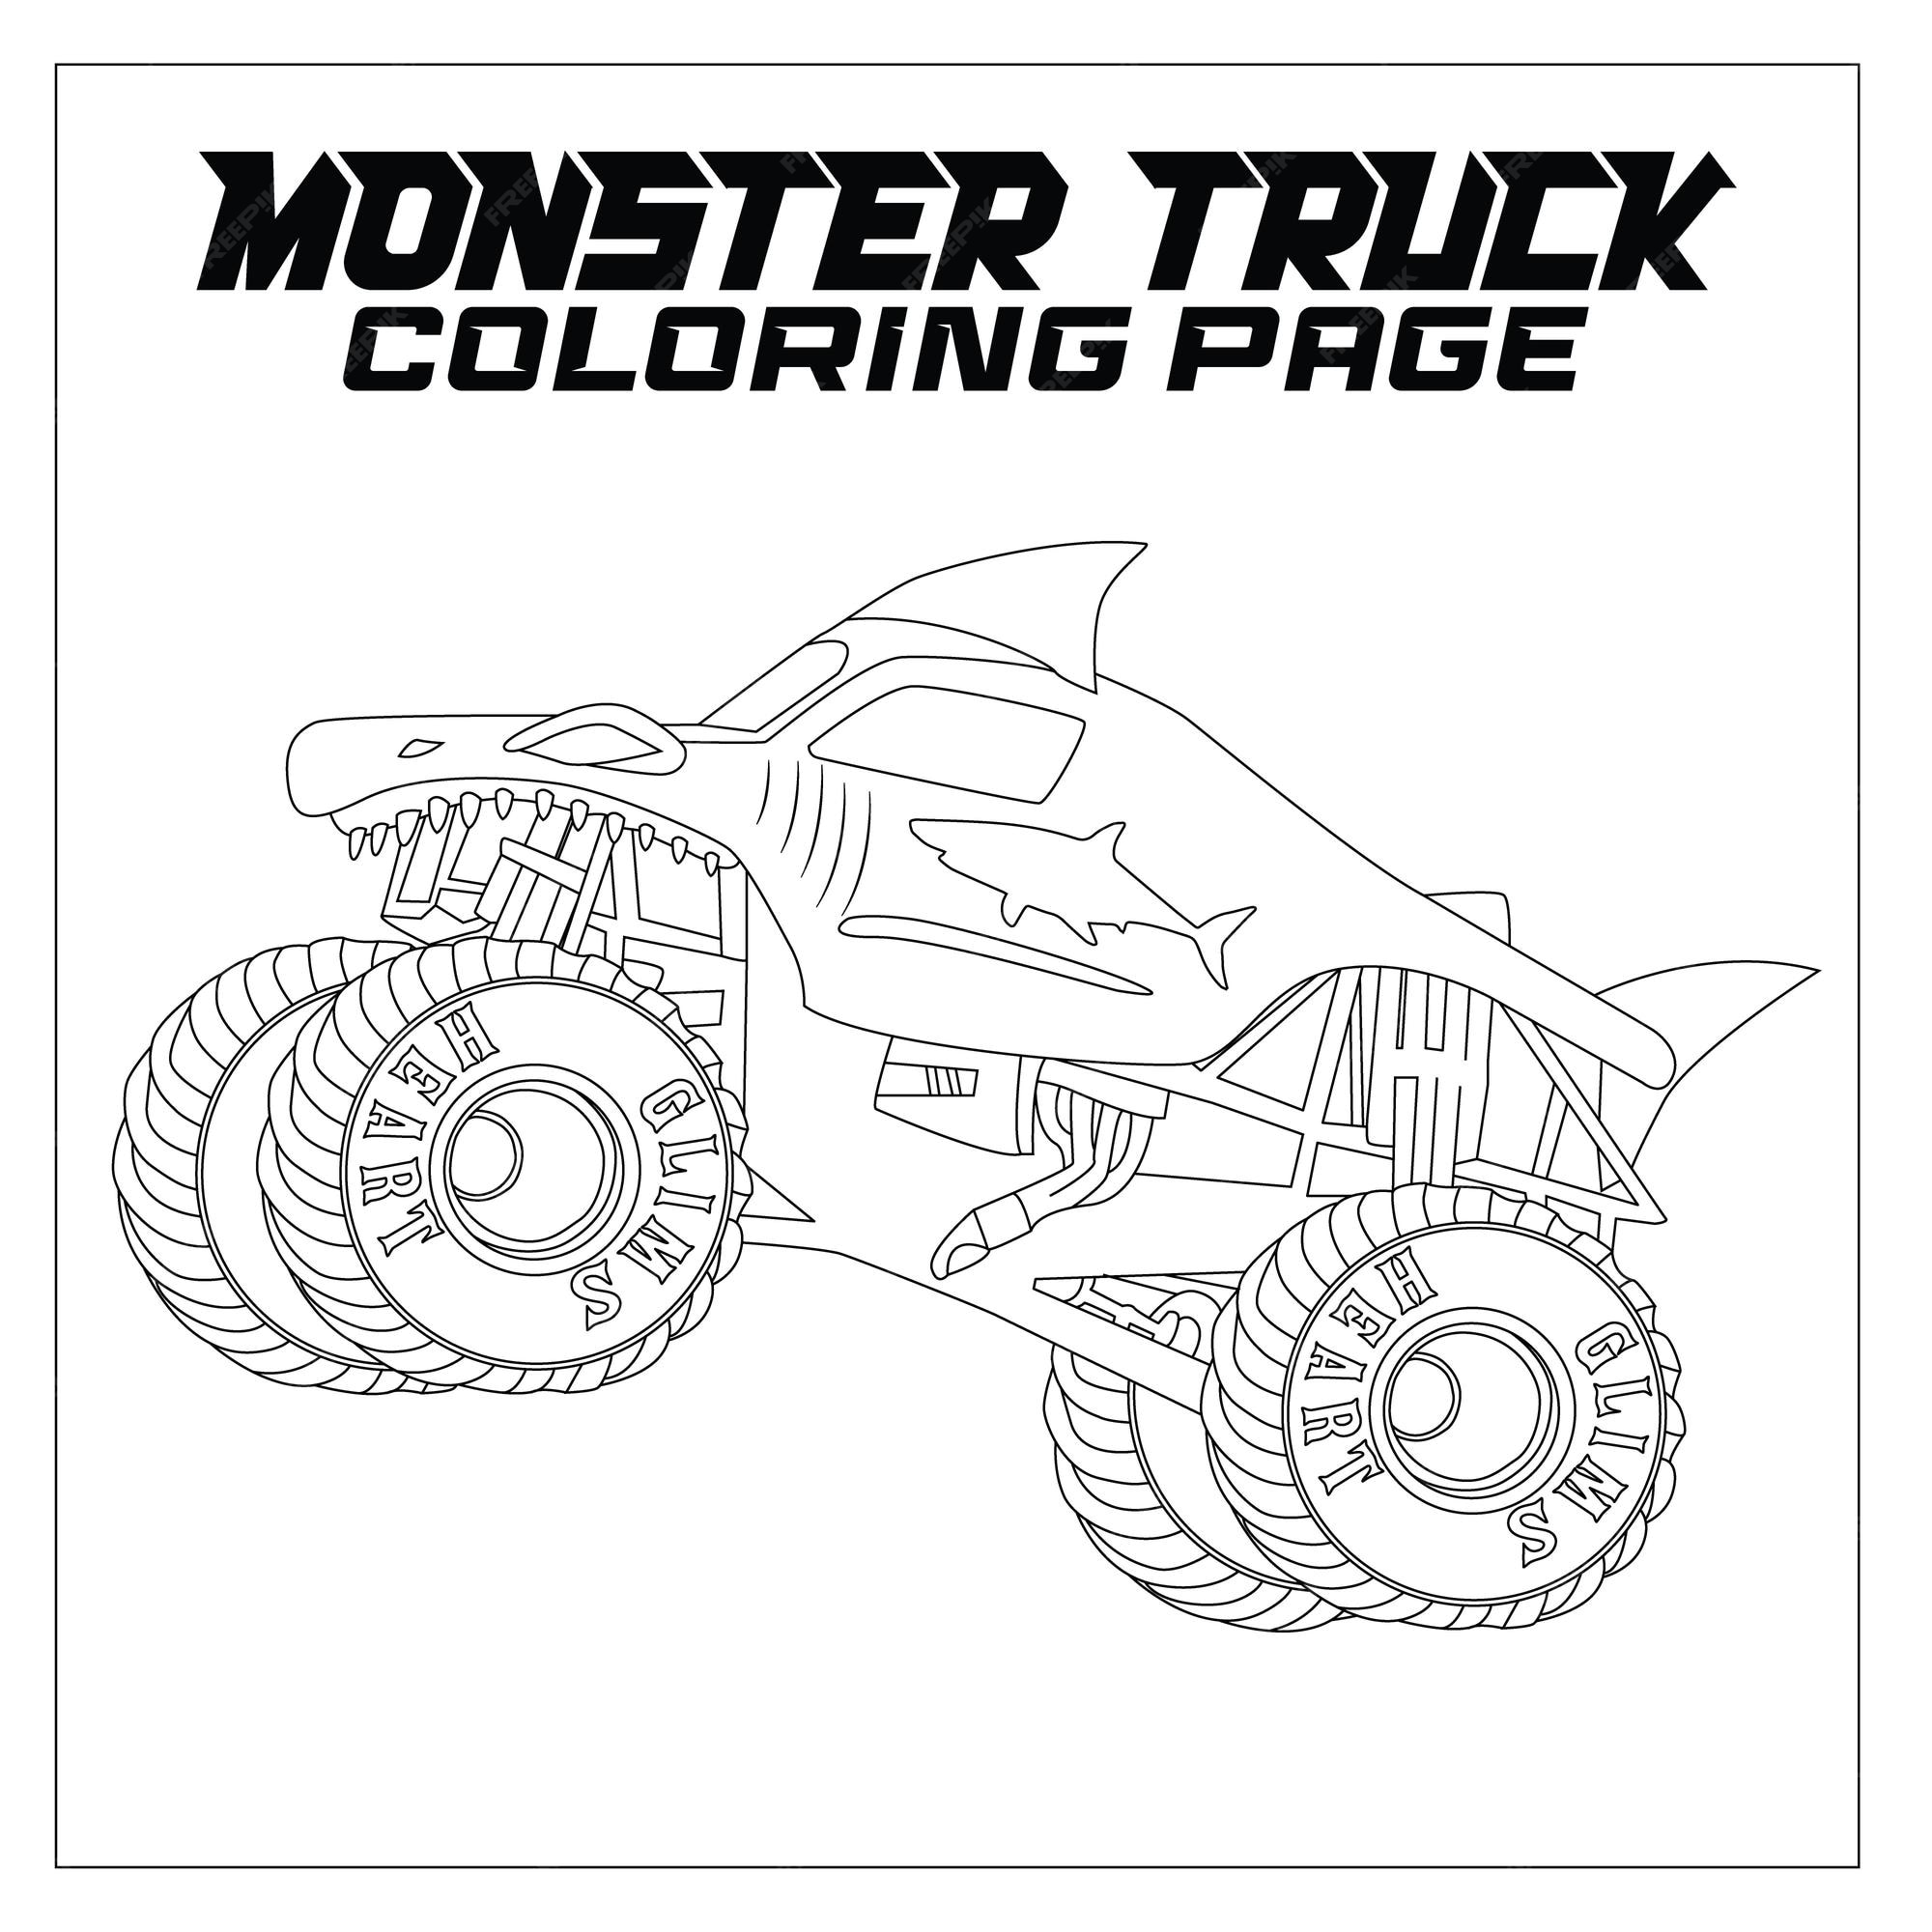 Premium vector monster truck coloring page for all ages